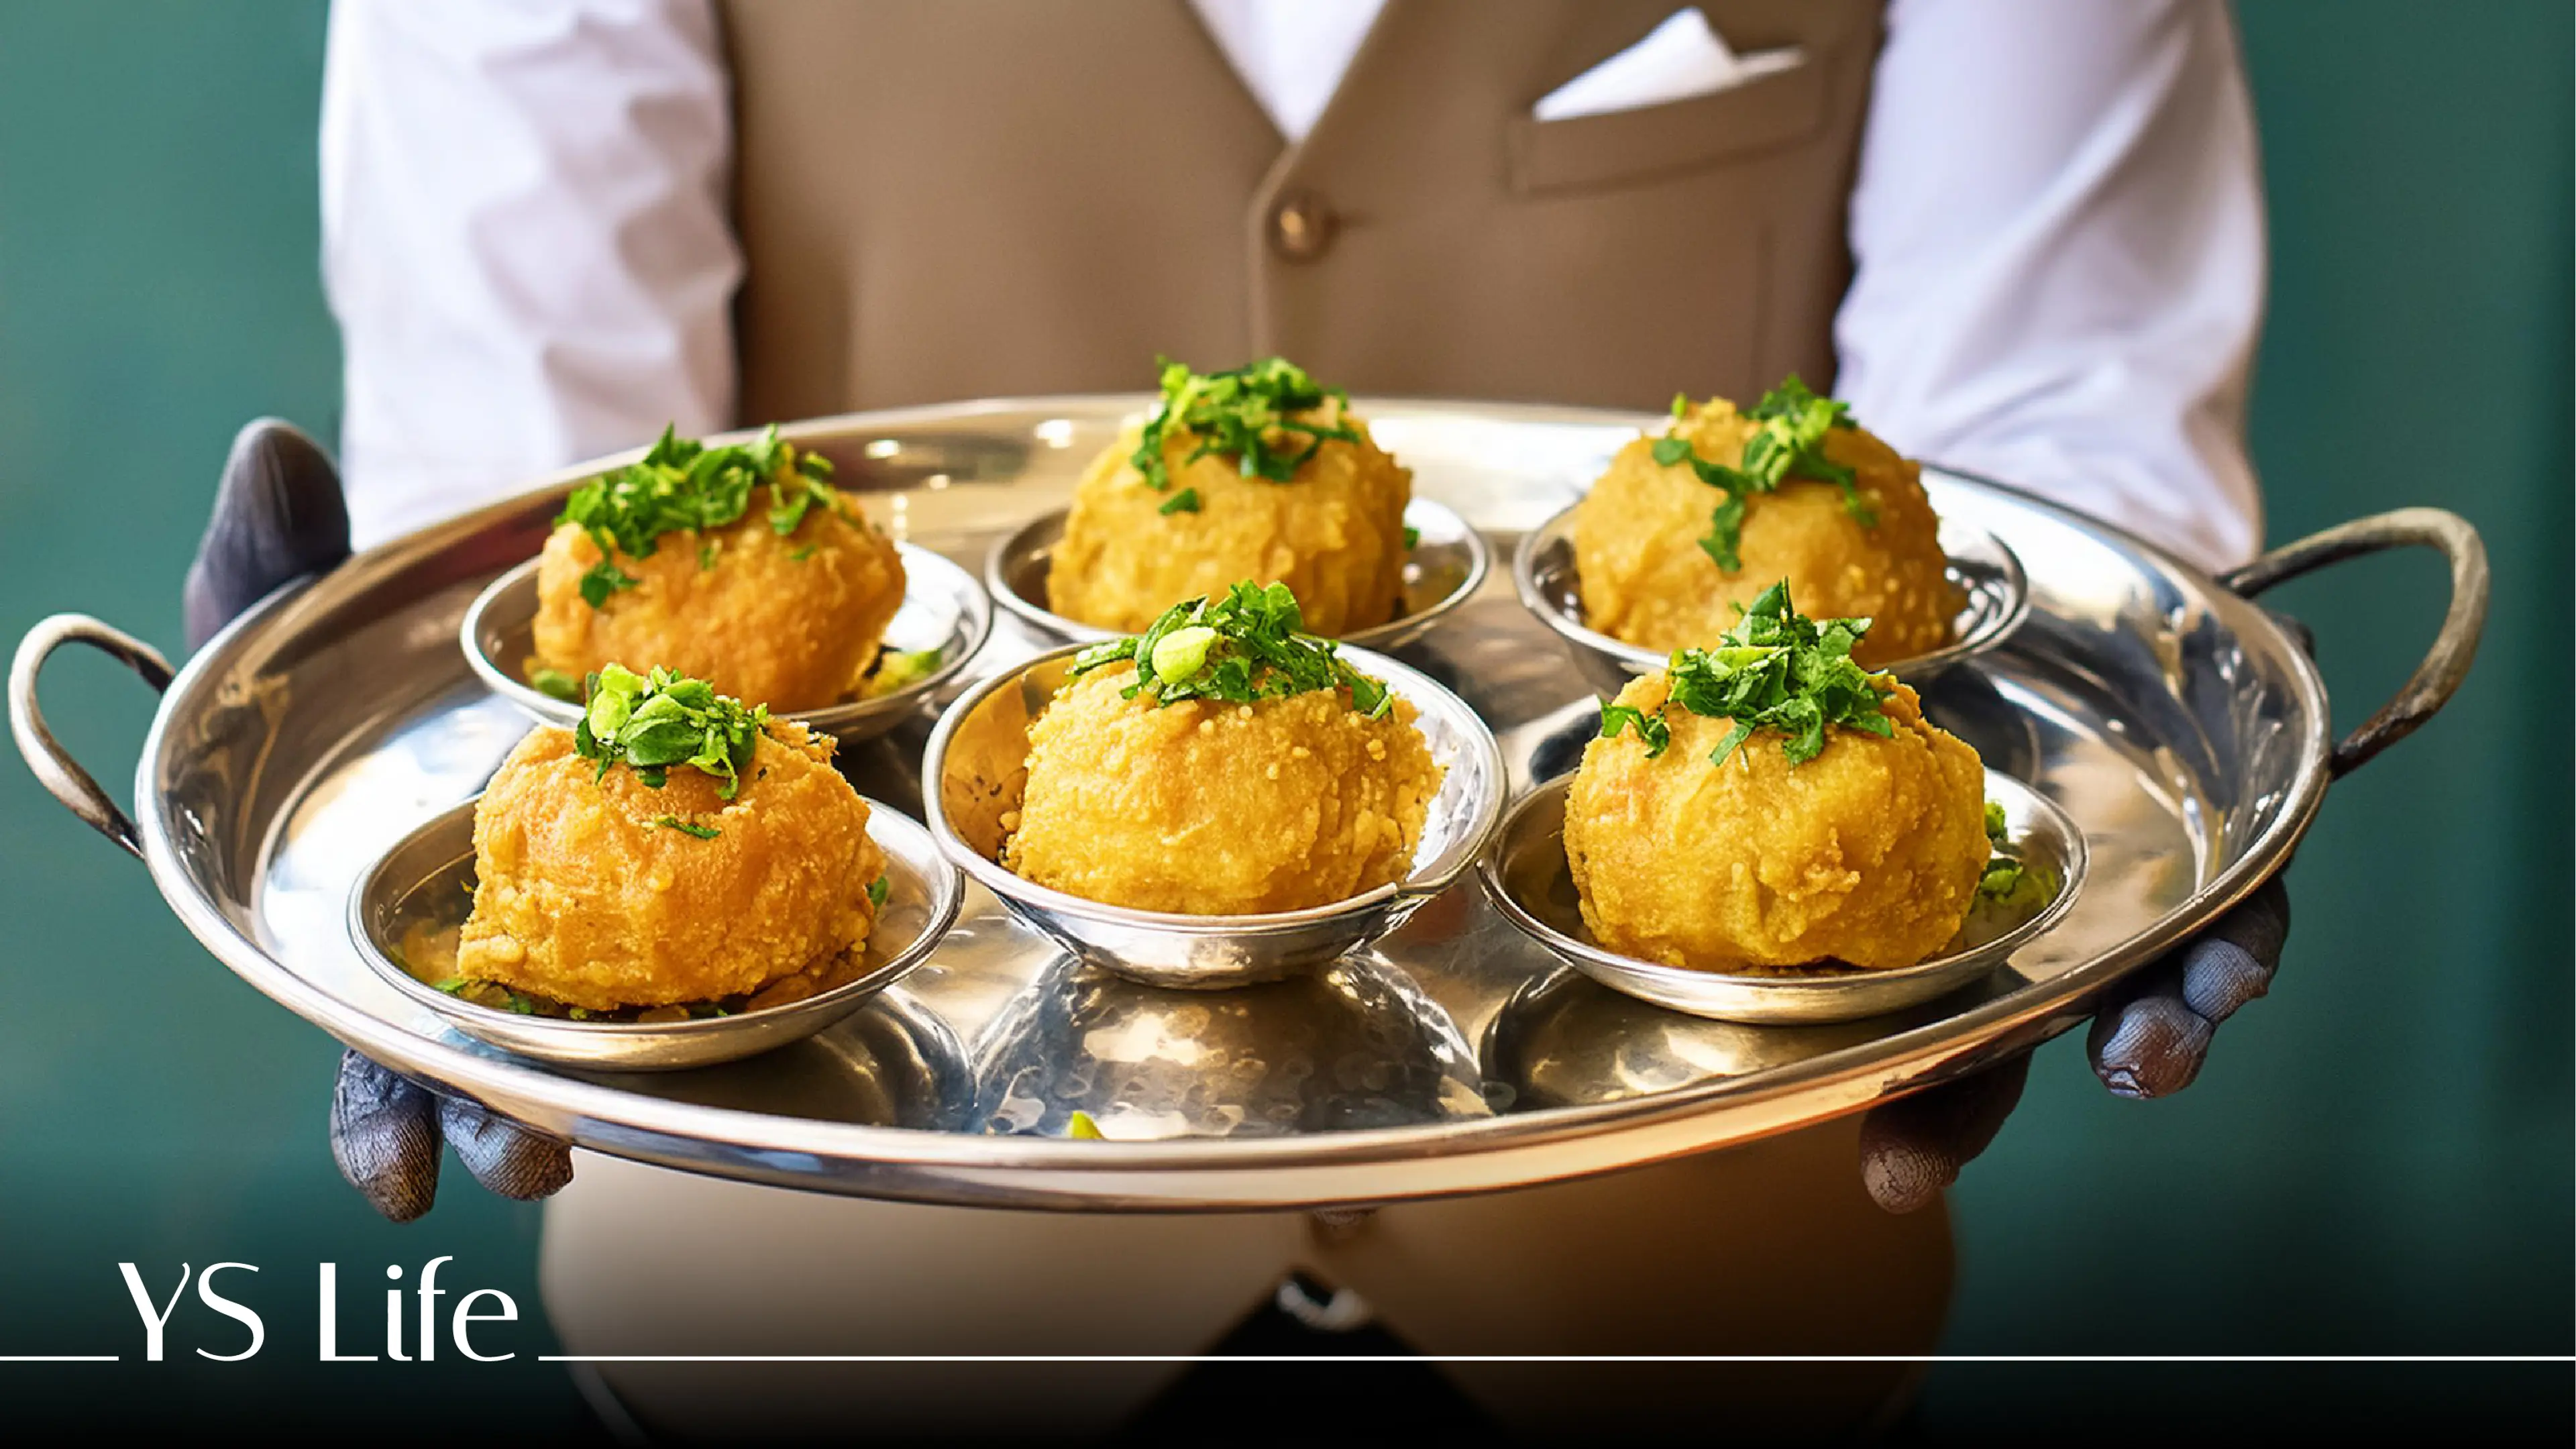 From Indian streets to fine dining restaurants, chaats go global